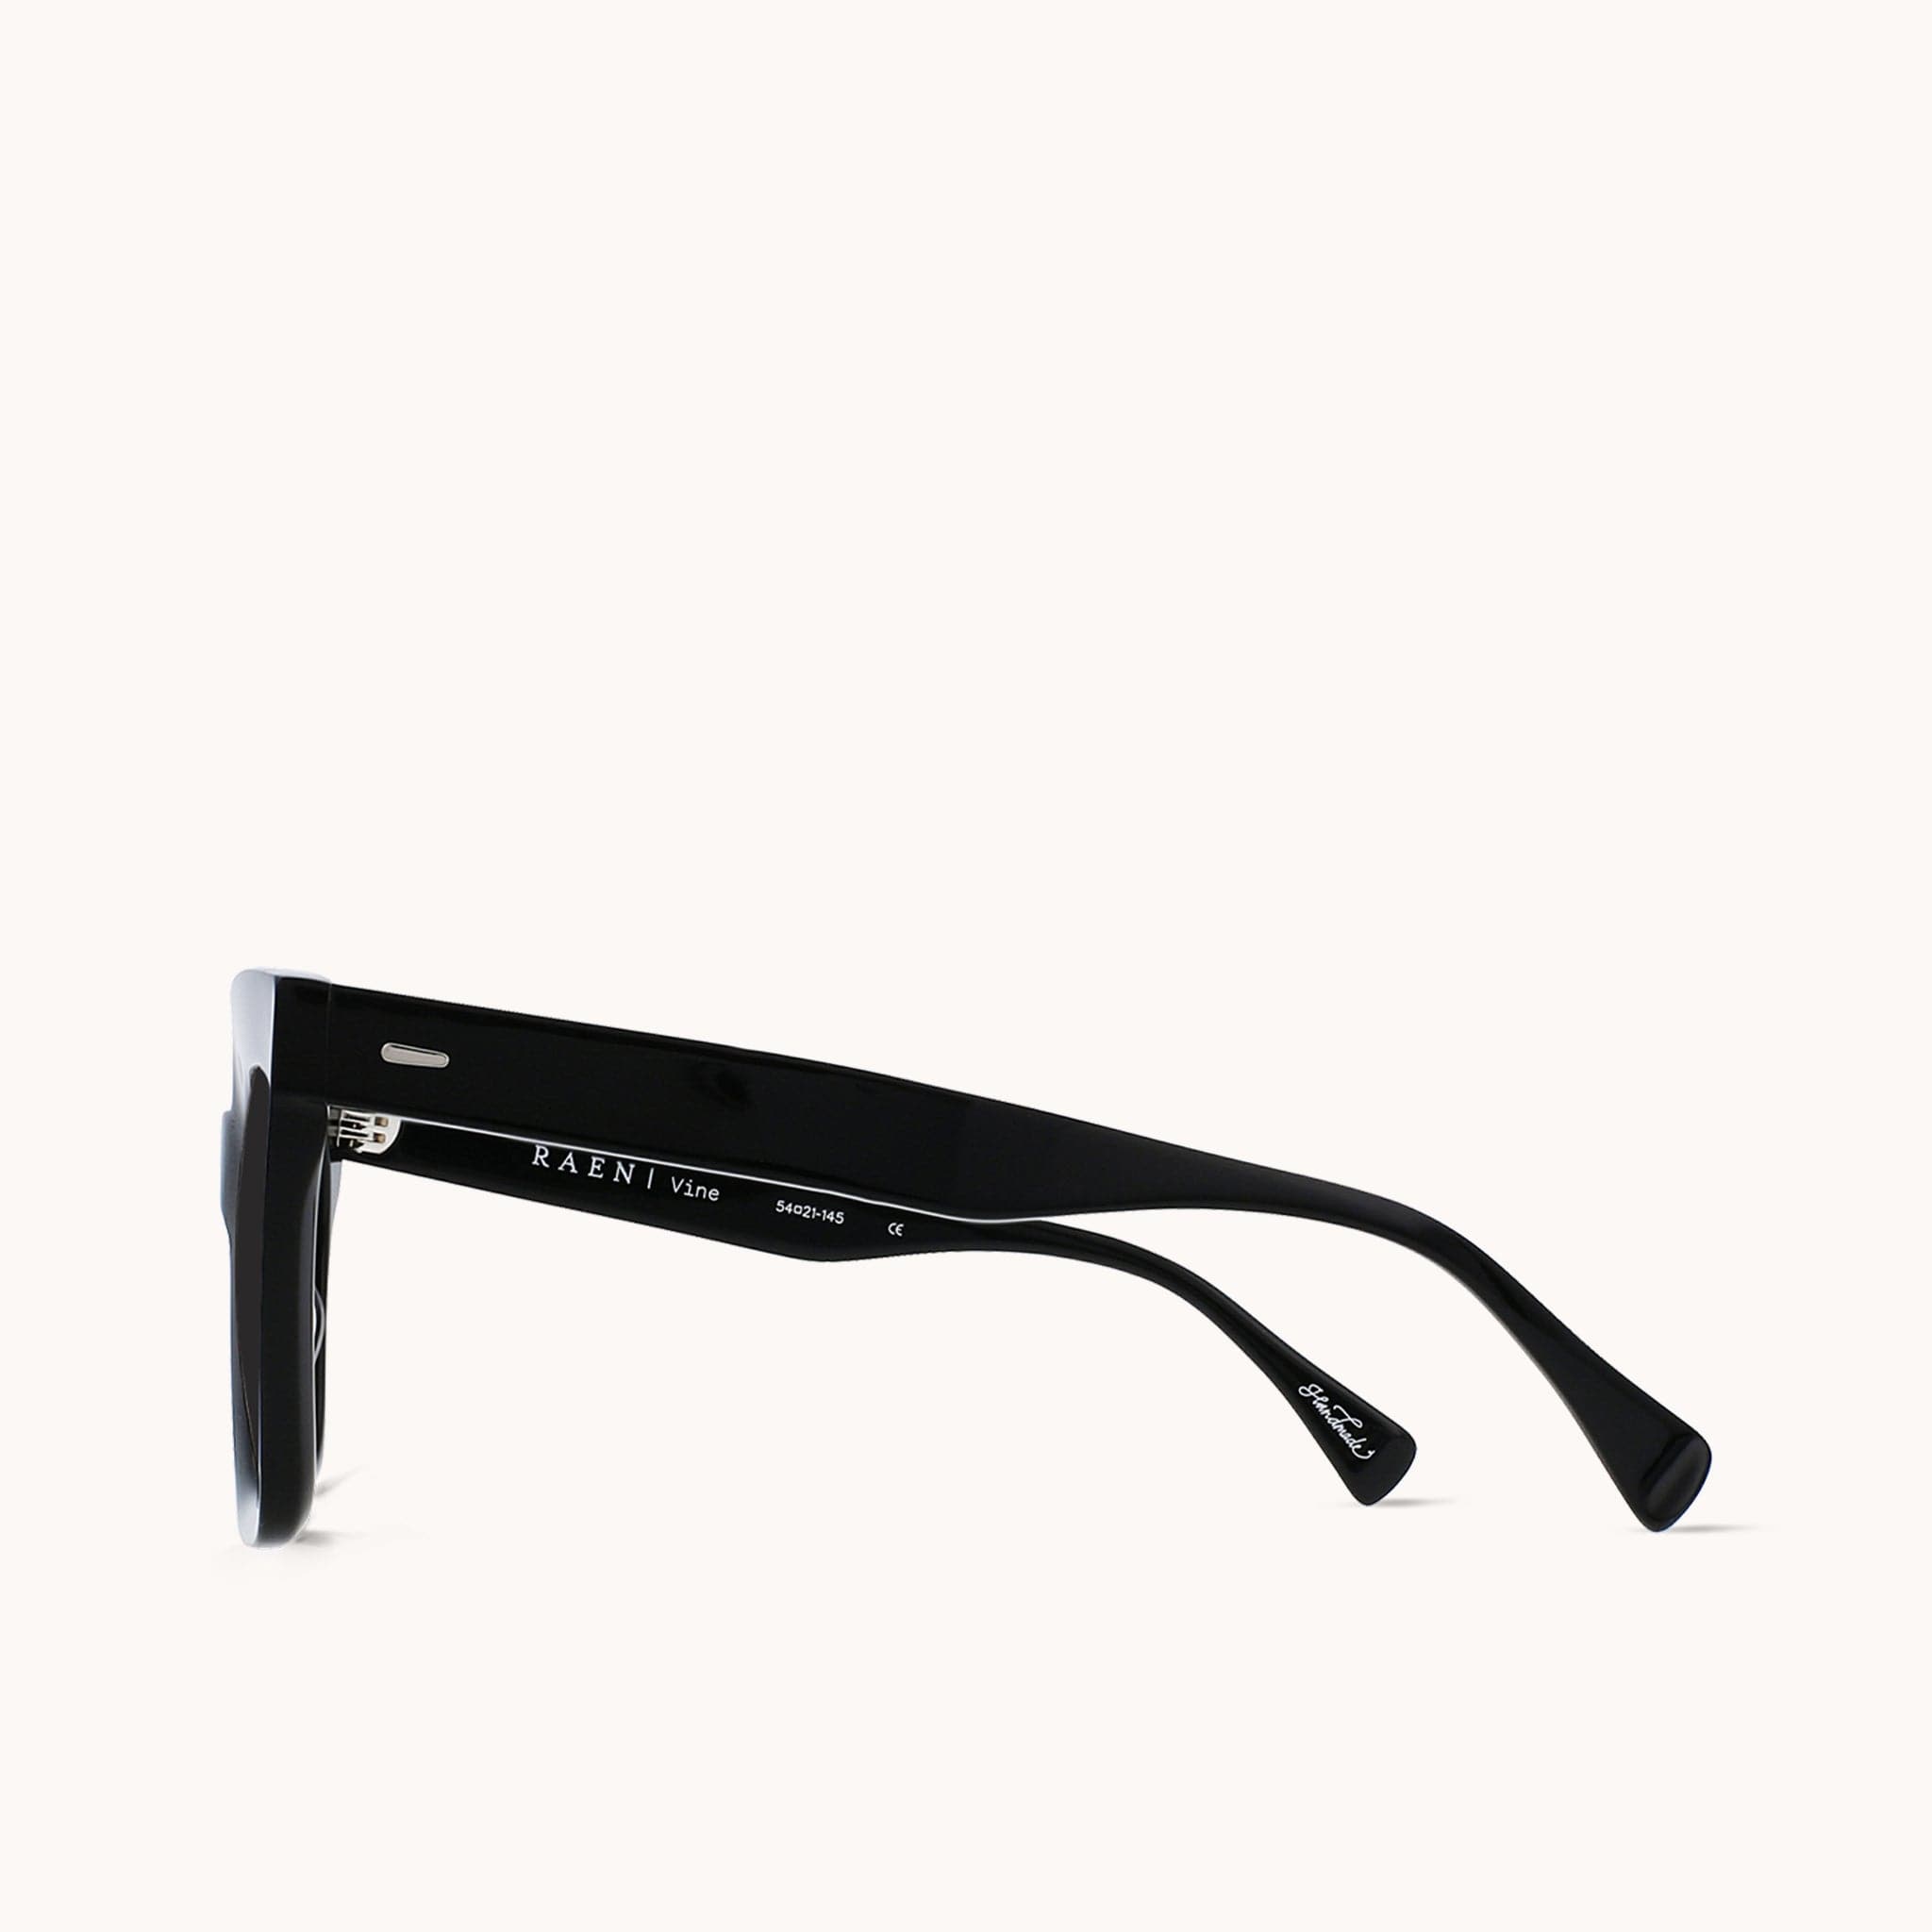 Side view of sunglasses highlighting the high quality acetate arms. The brand name 'Raen' is engraved on the inside of one of the arms.